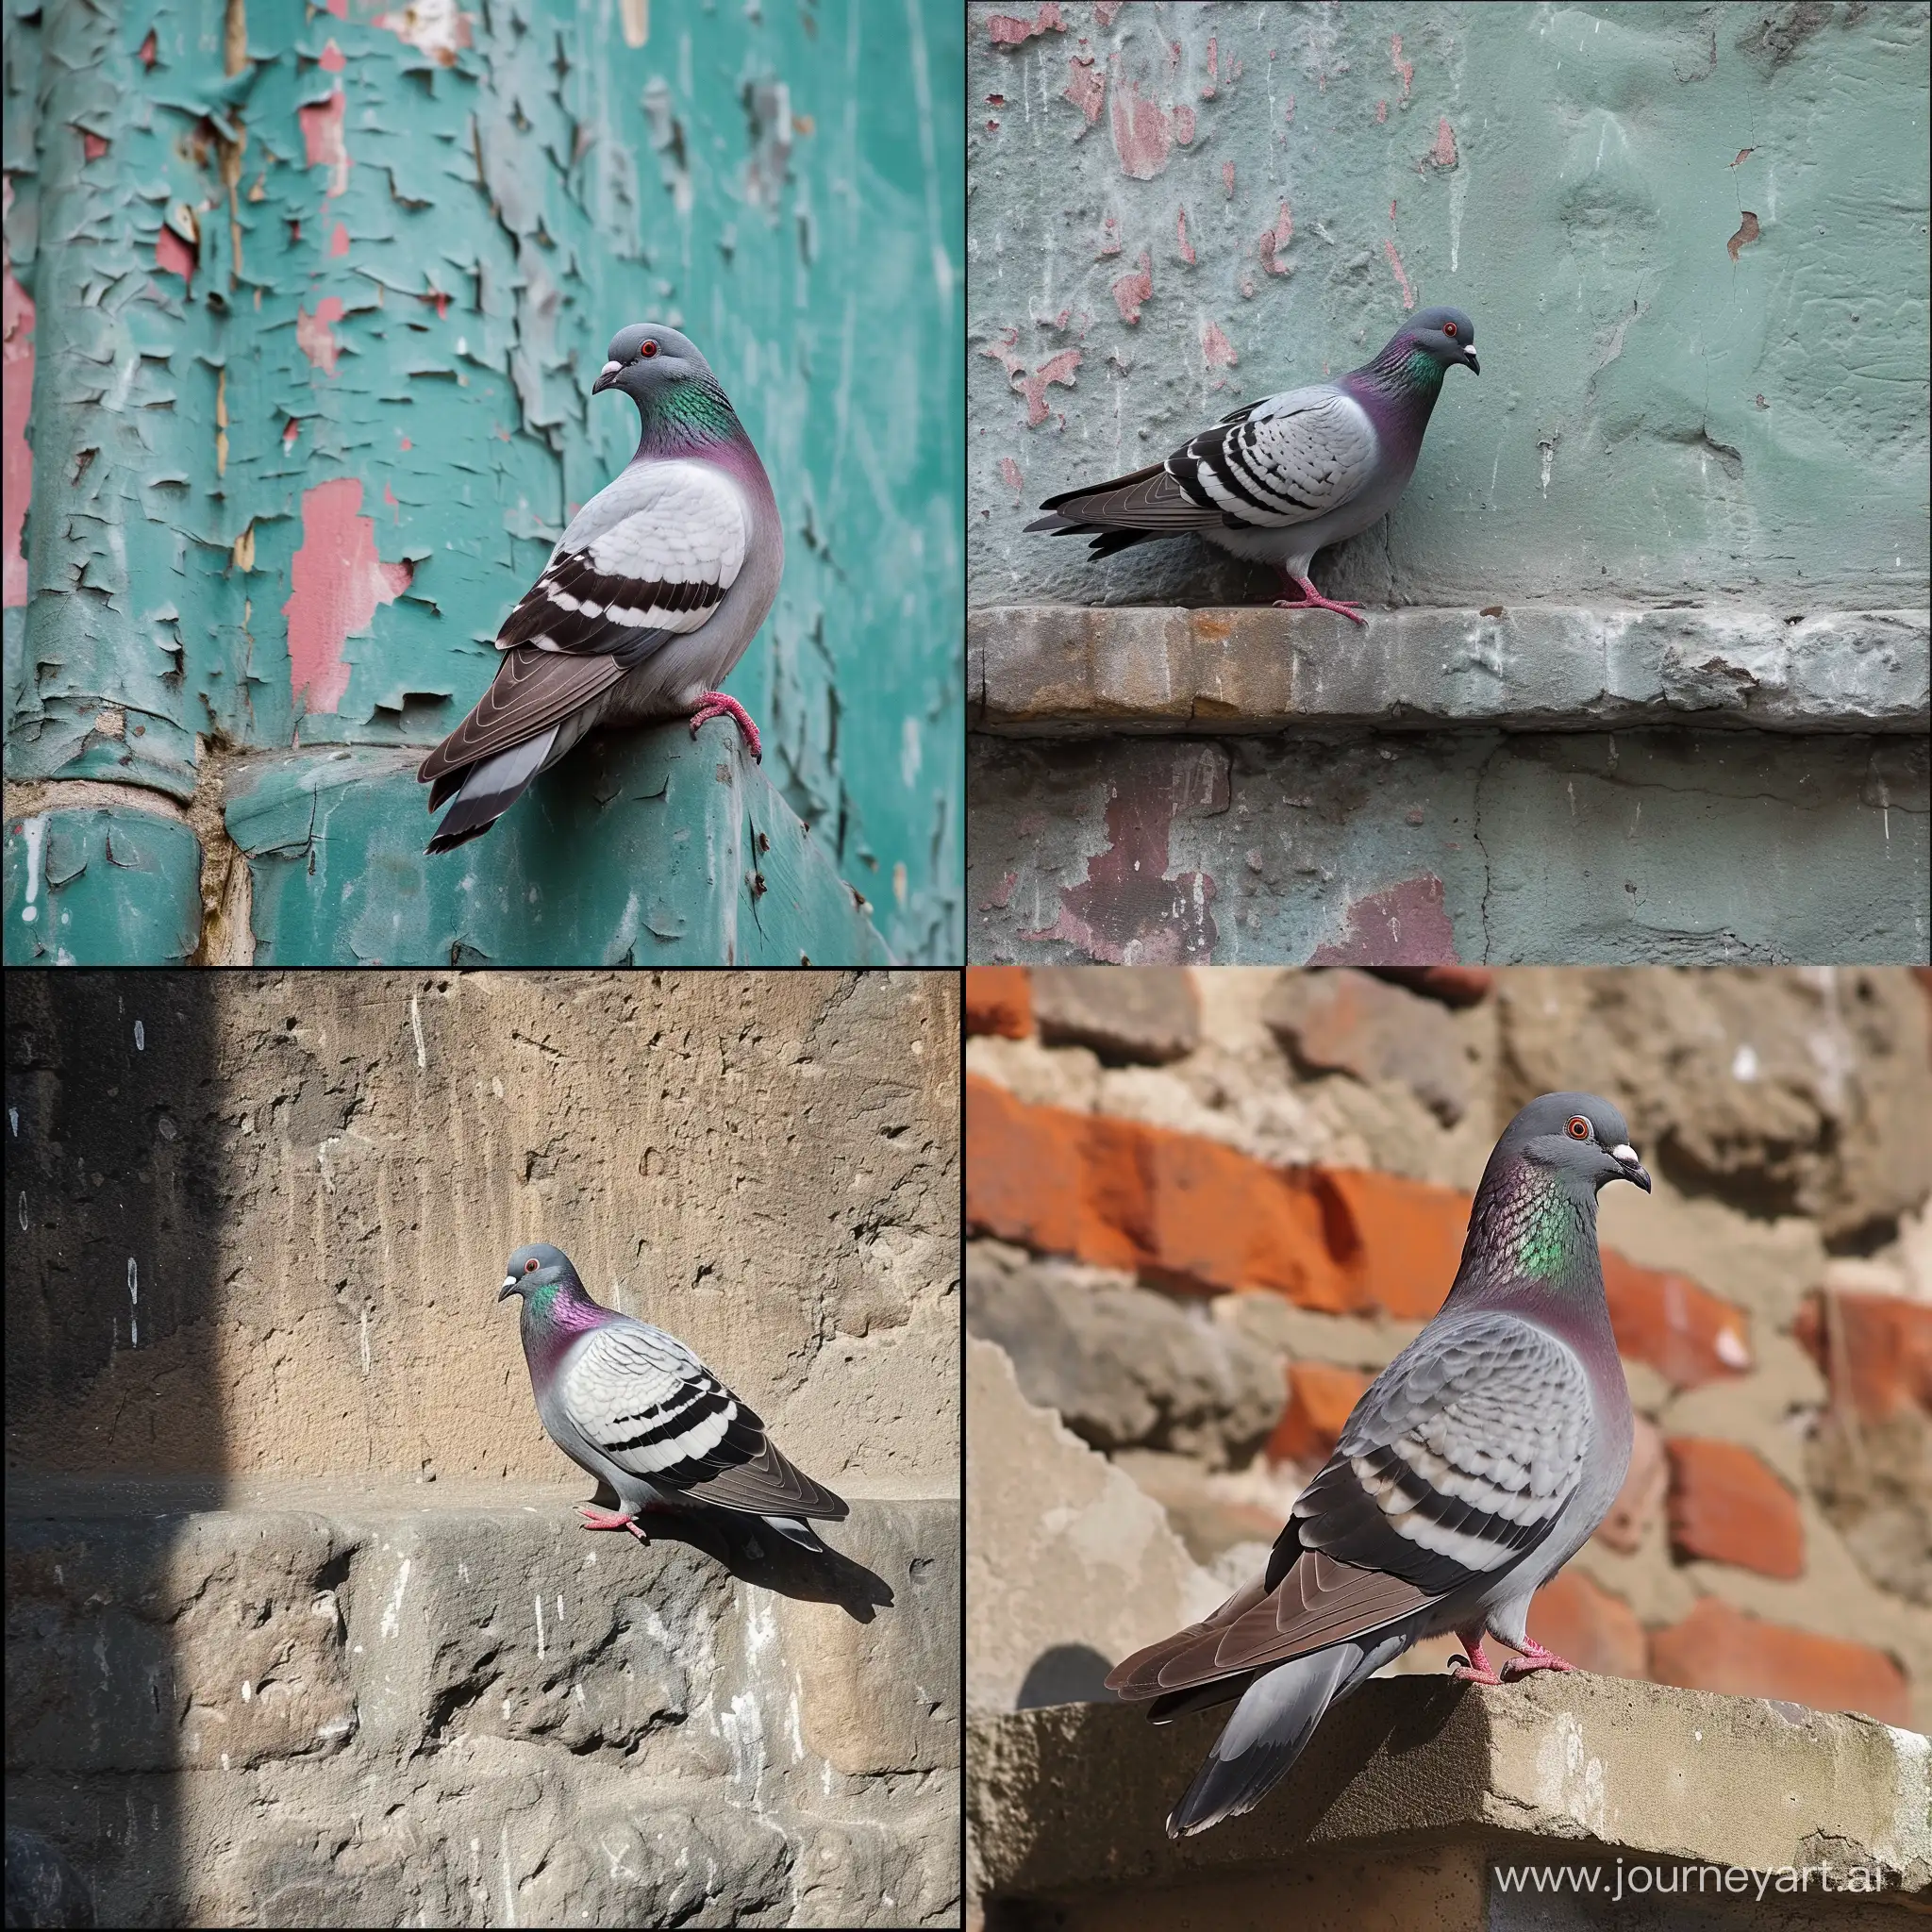 A pigeon on the wall